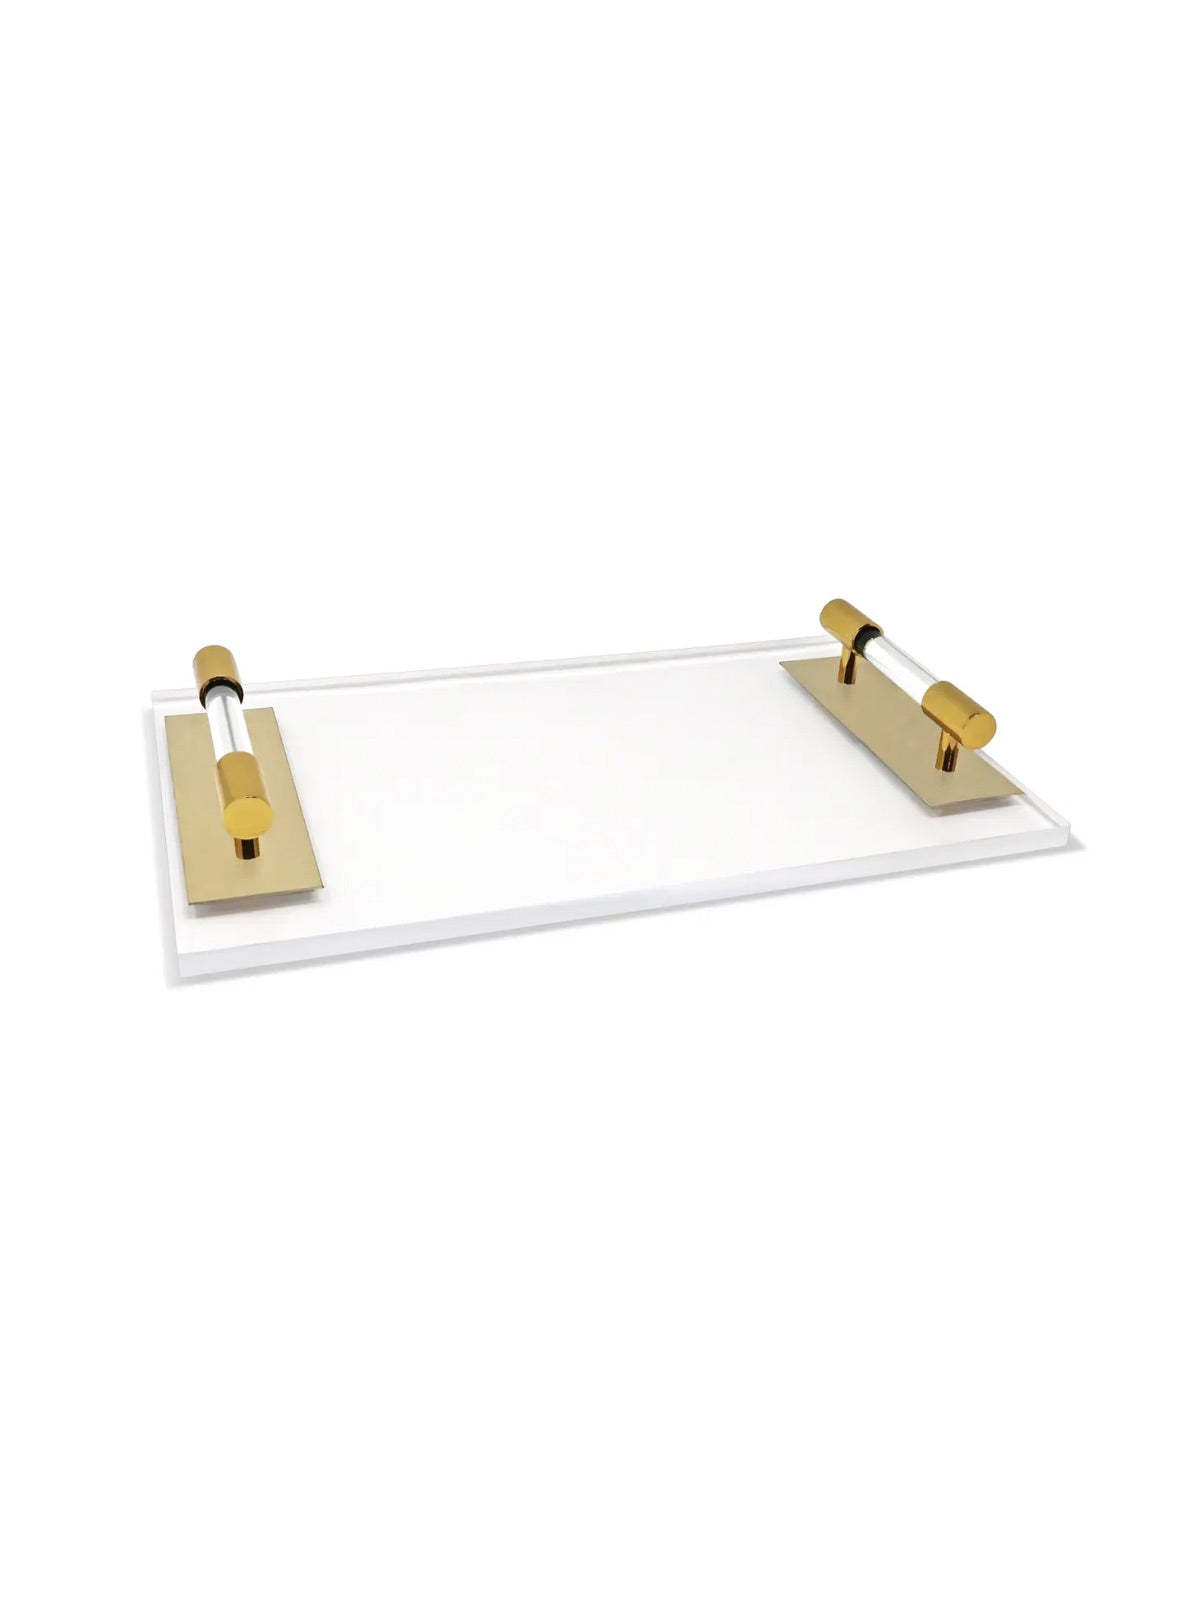 Acrylic Serving Tray with Modern Gold Handles, 15L inches.